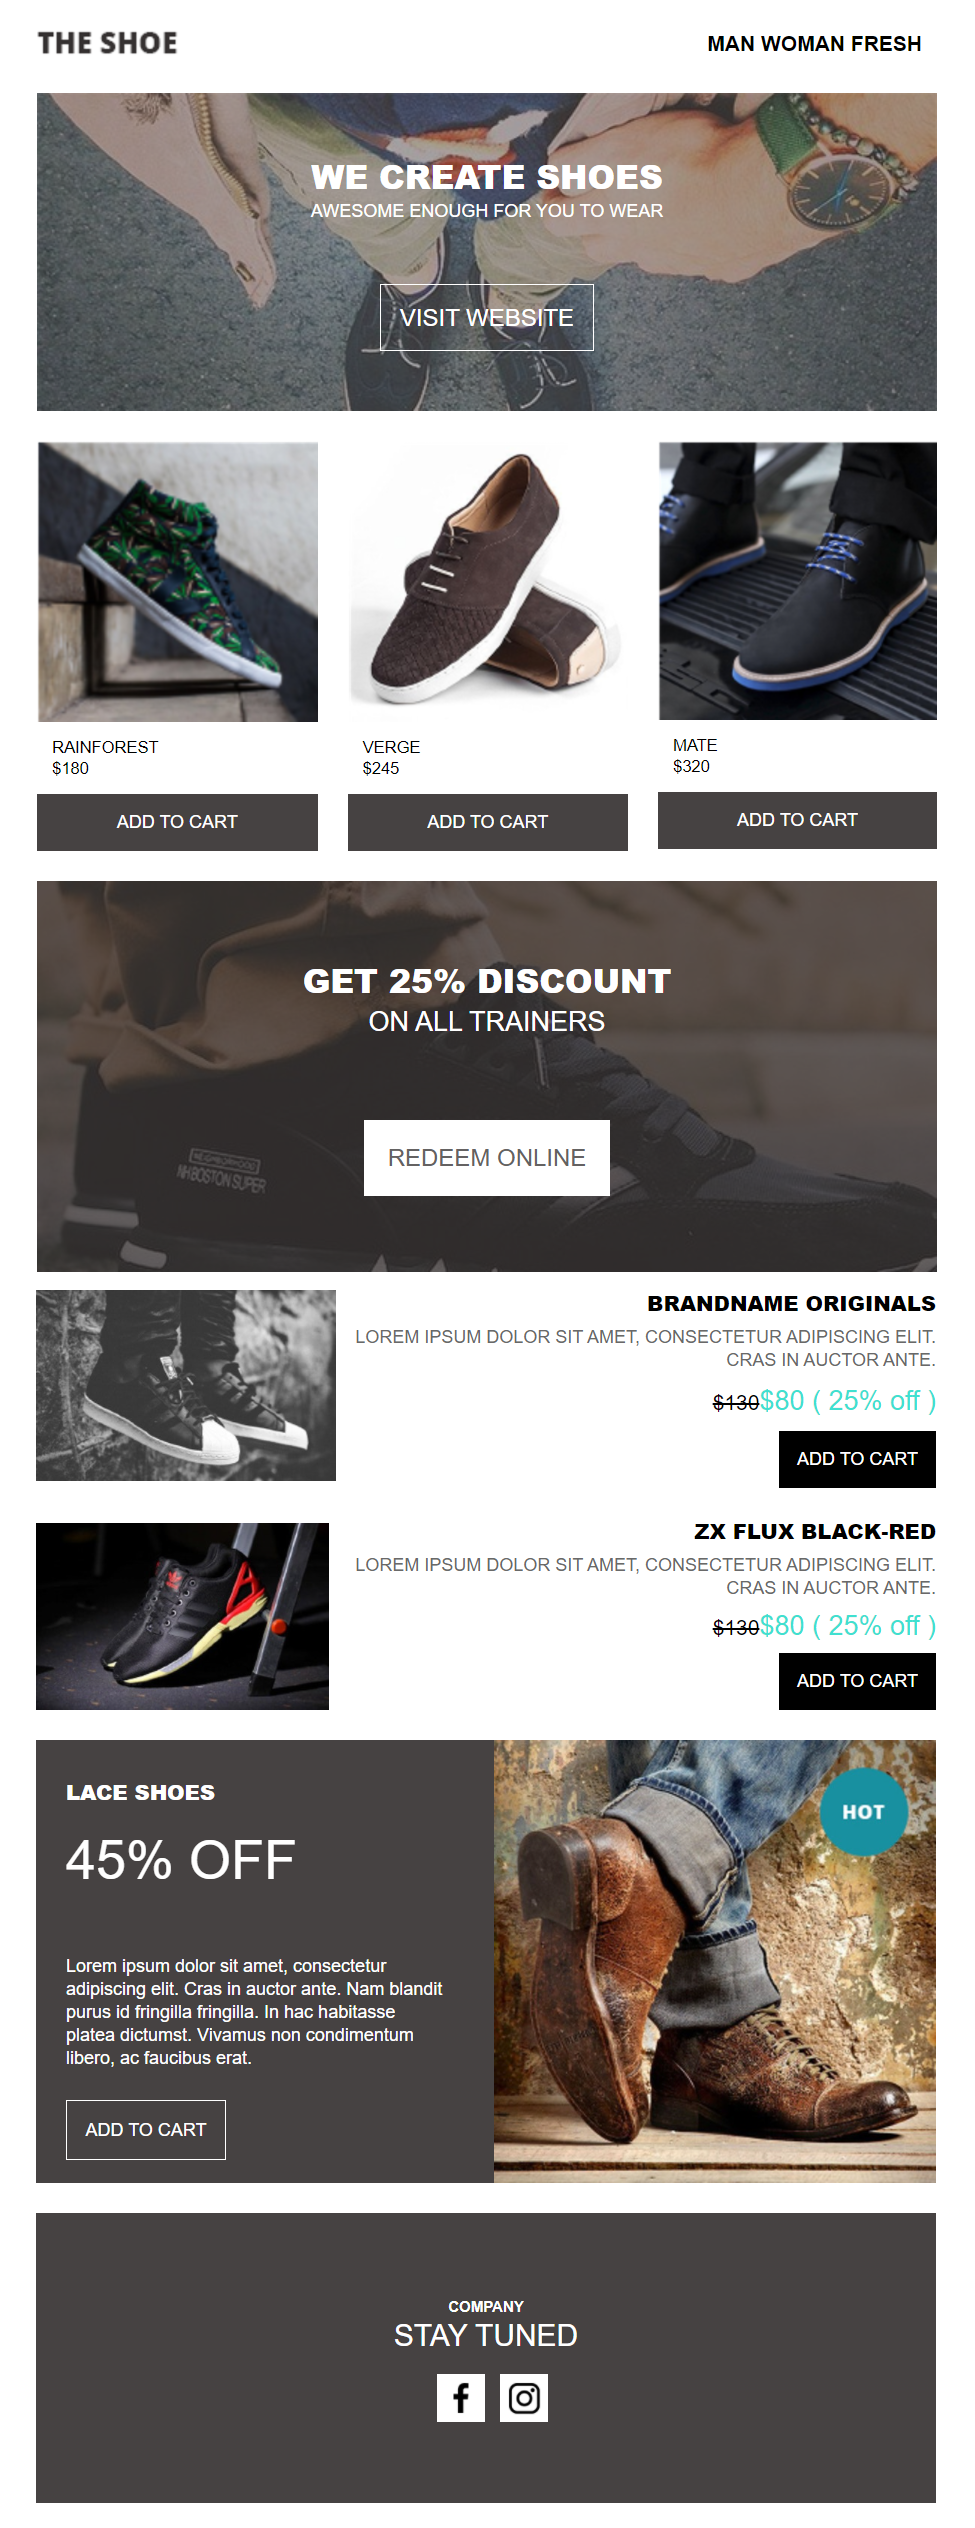 footwear email design example